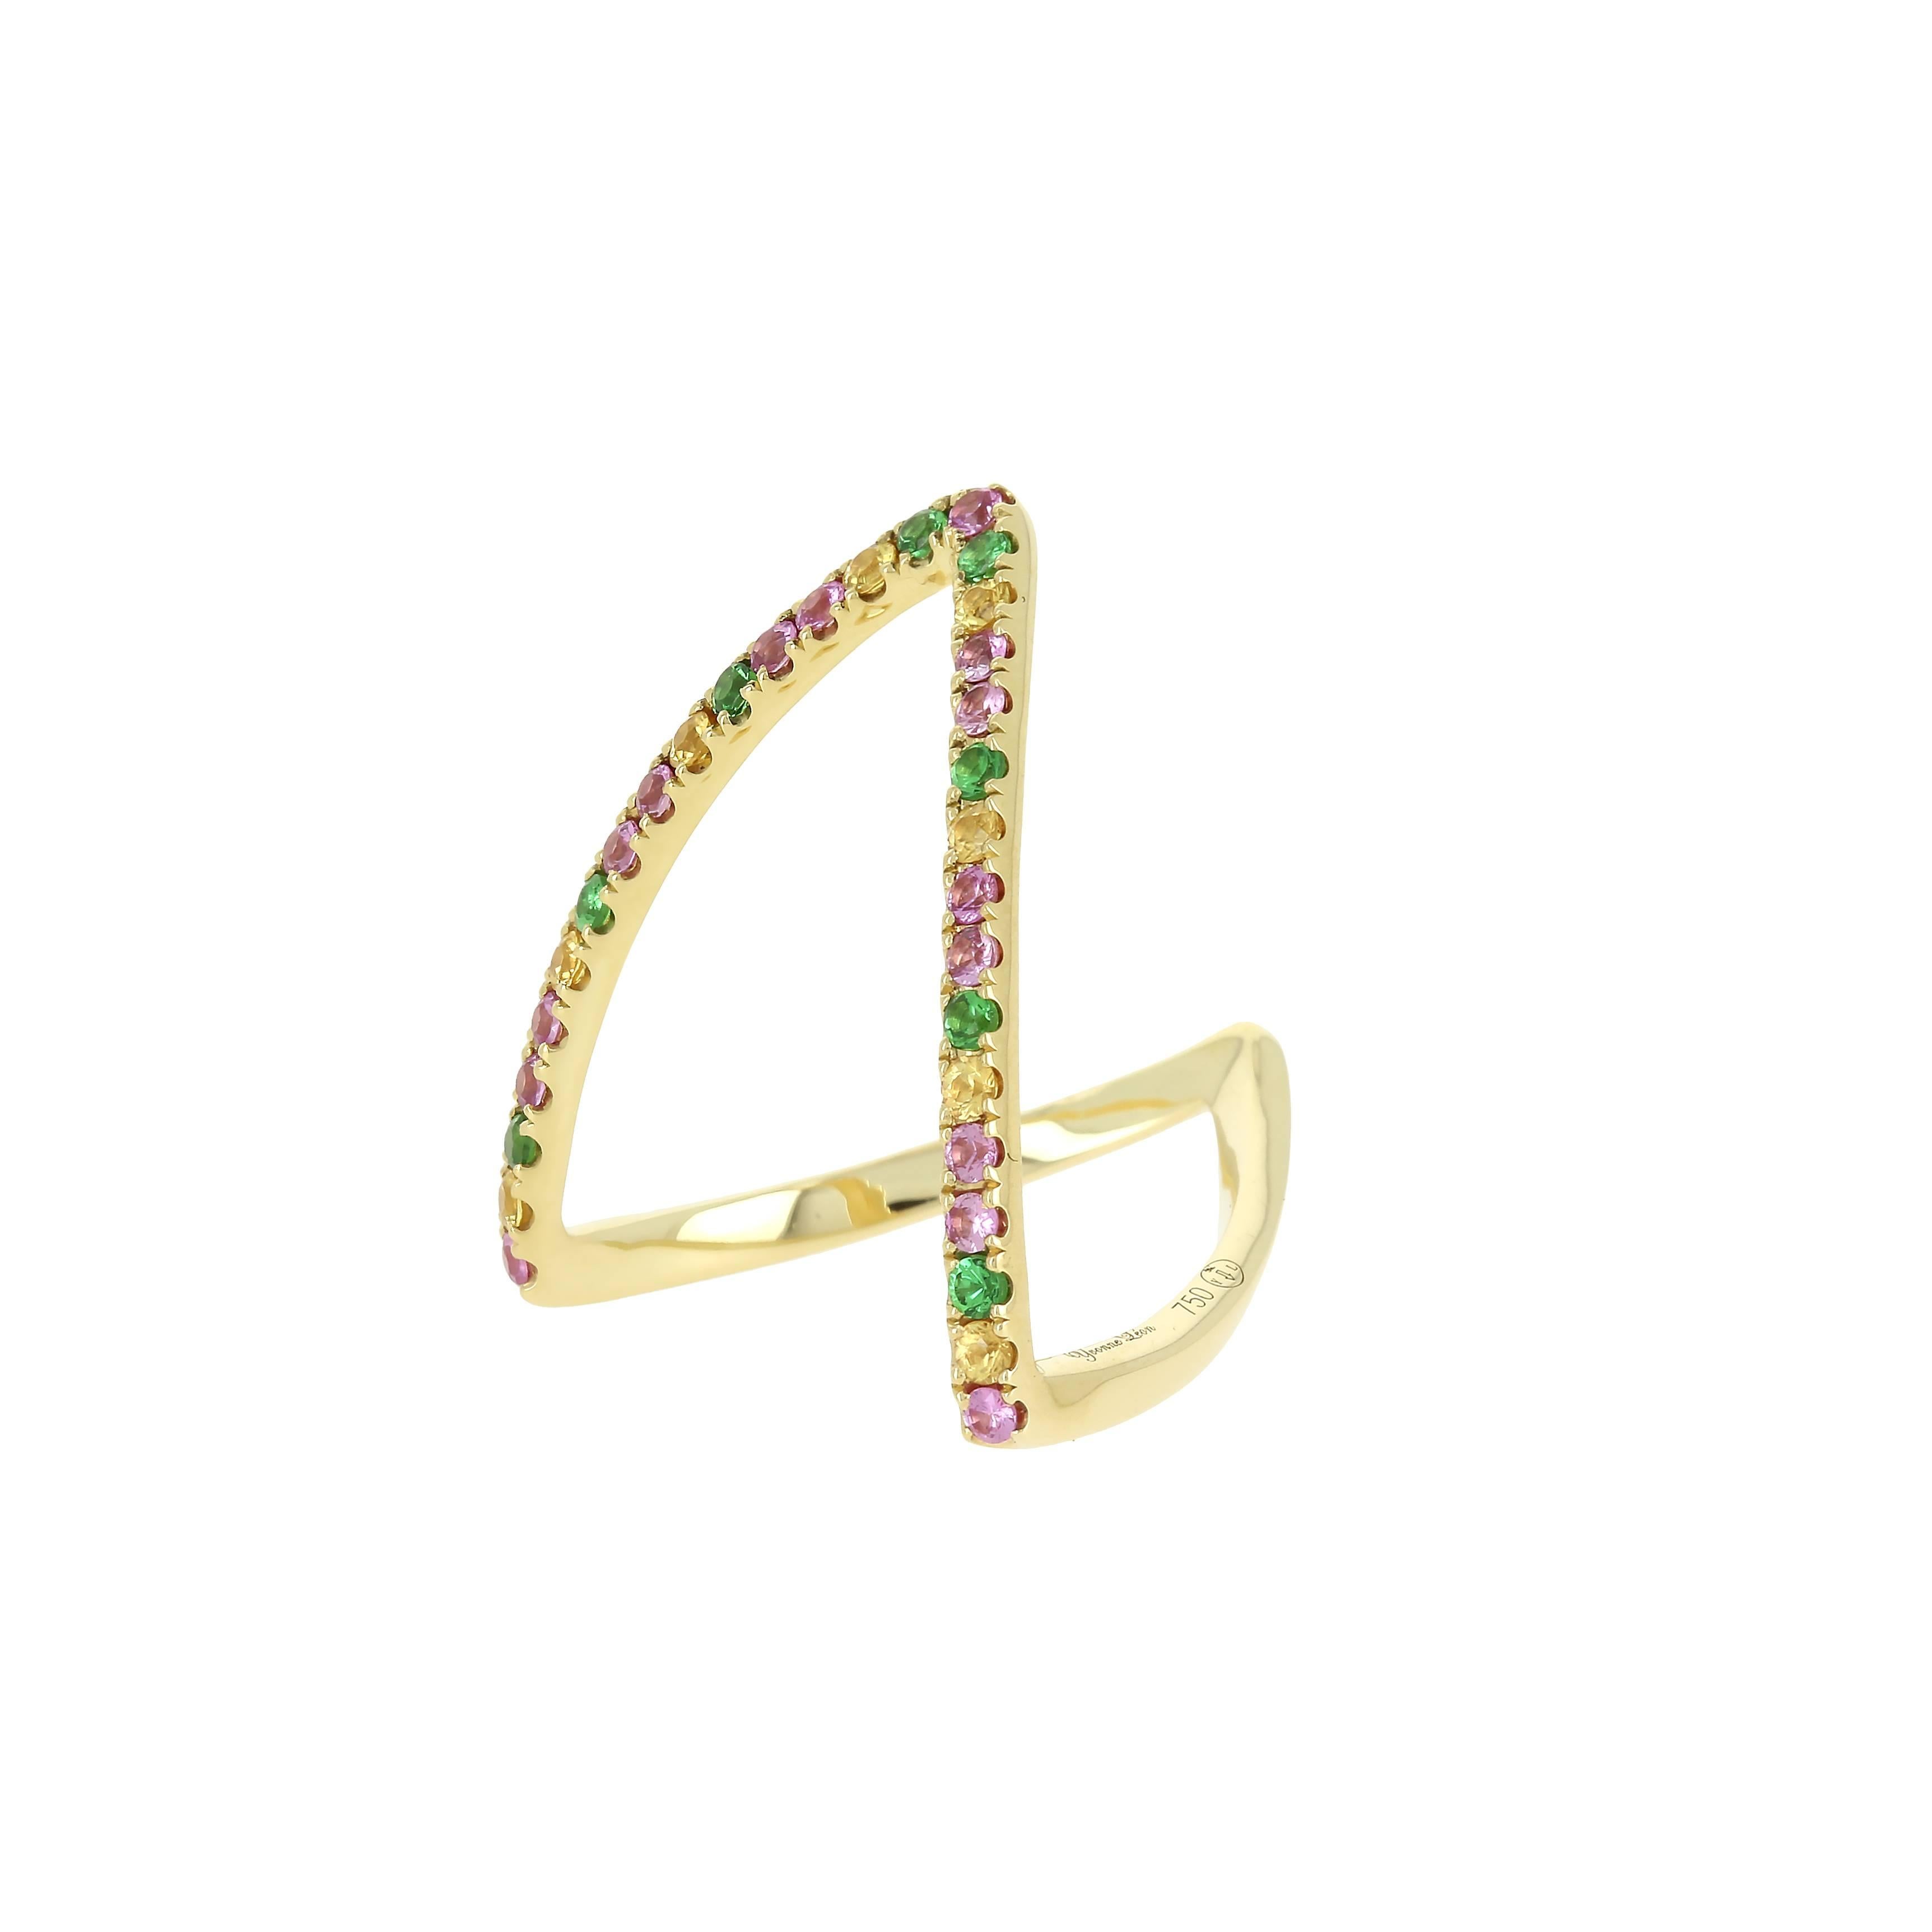 Ring in Yellow Gold 18 carats 3,1gr approx.
Pink Sapphires 0,20 carats approx.
Tsavorites 0,15 carats approx.
Yellow Sapphires 0,15 carats Approx.
V shape
Can be make in any size on demand.
